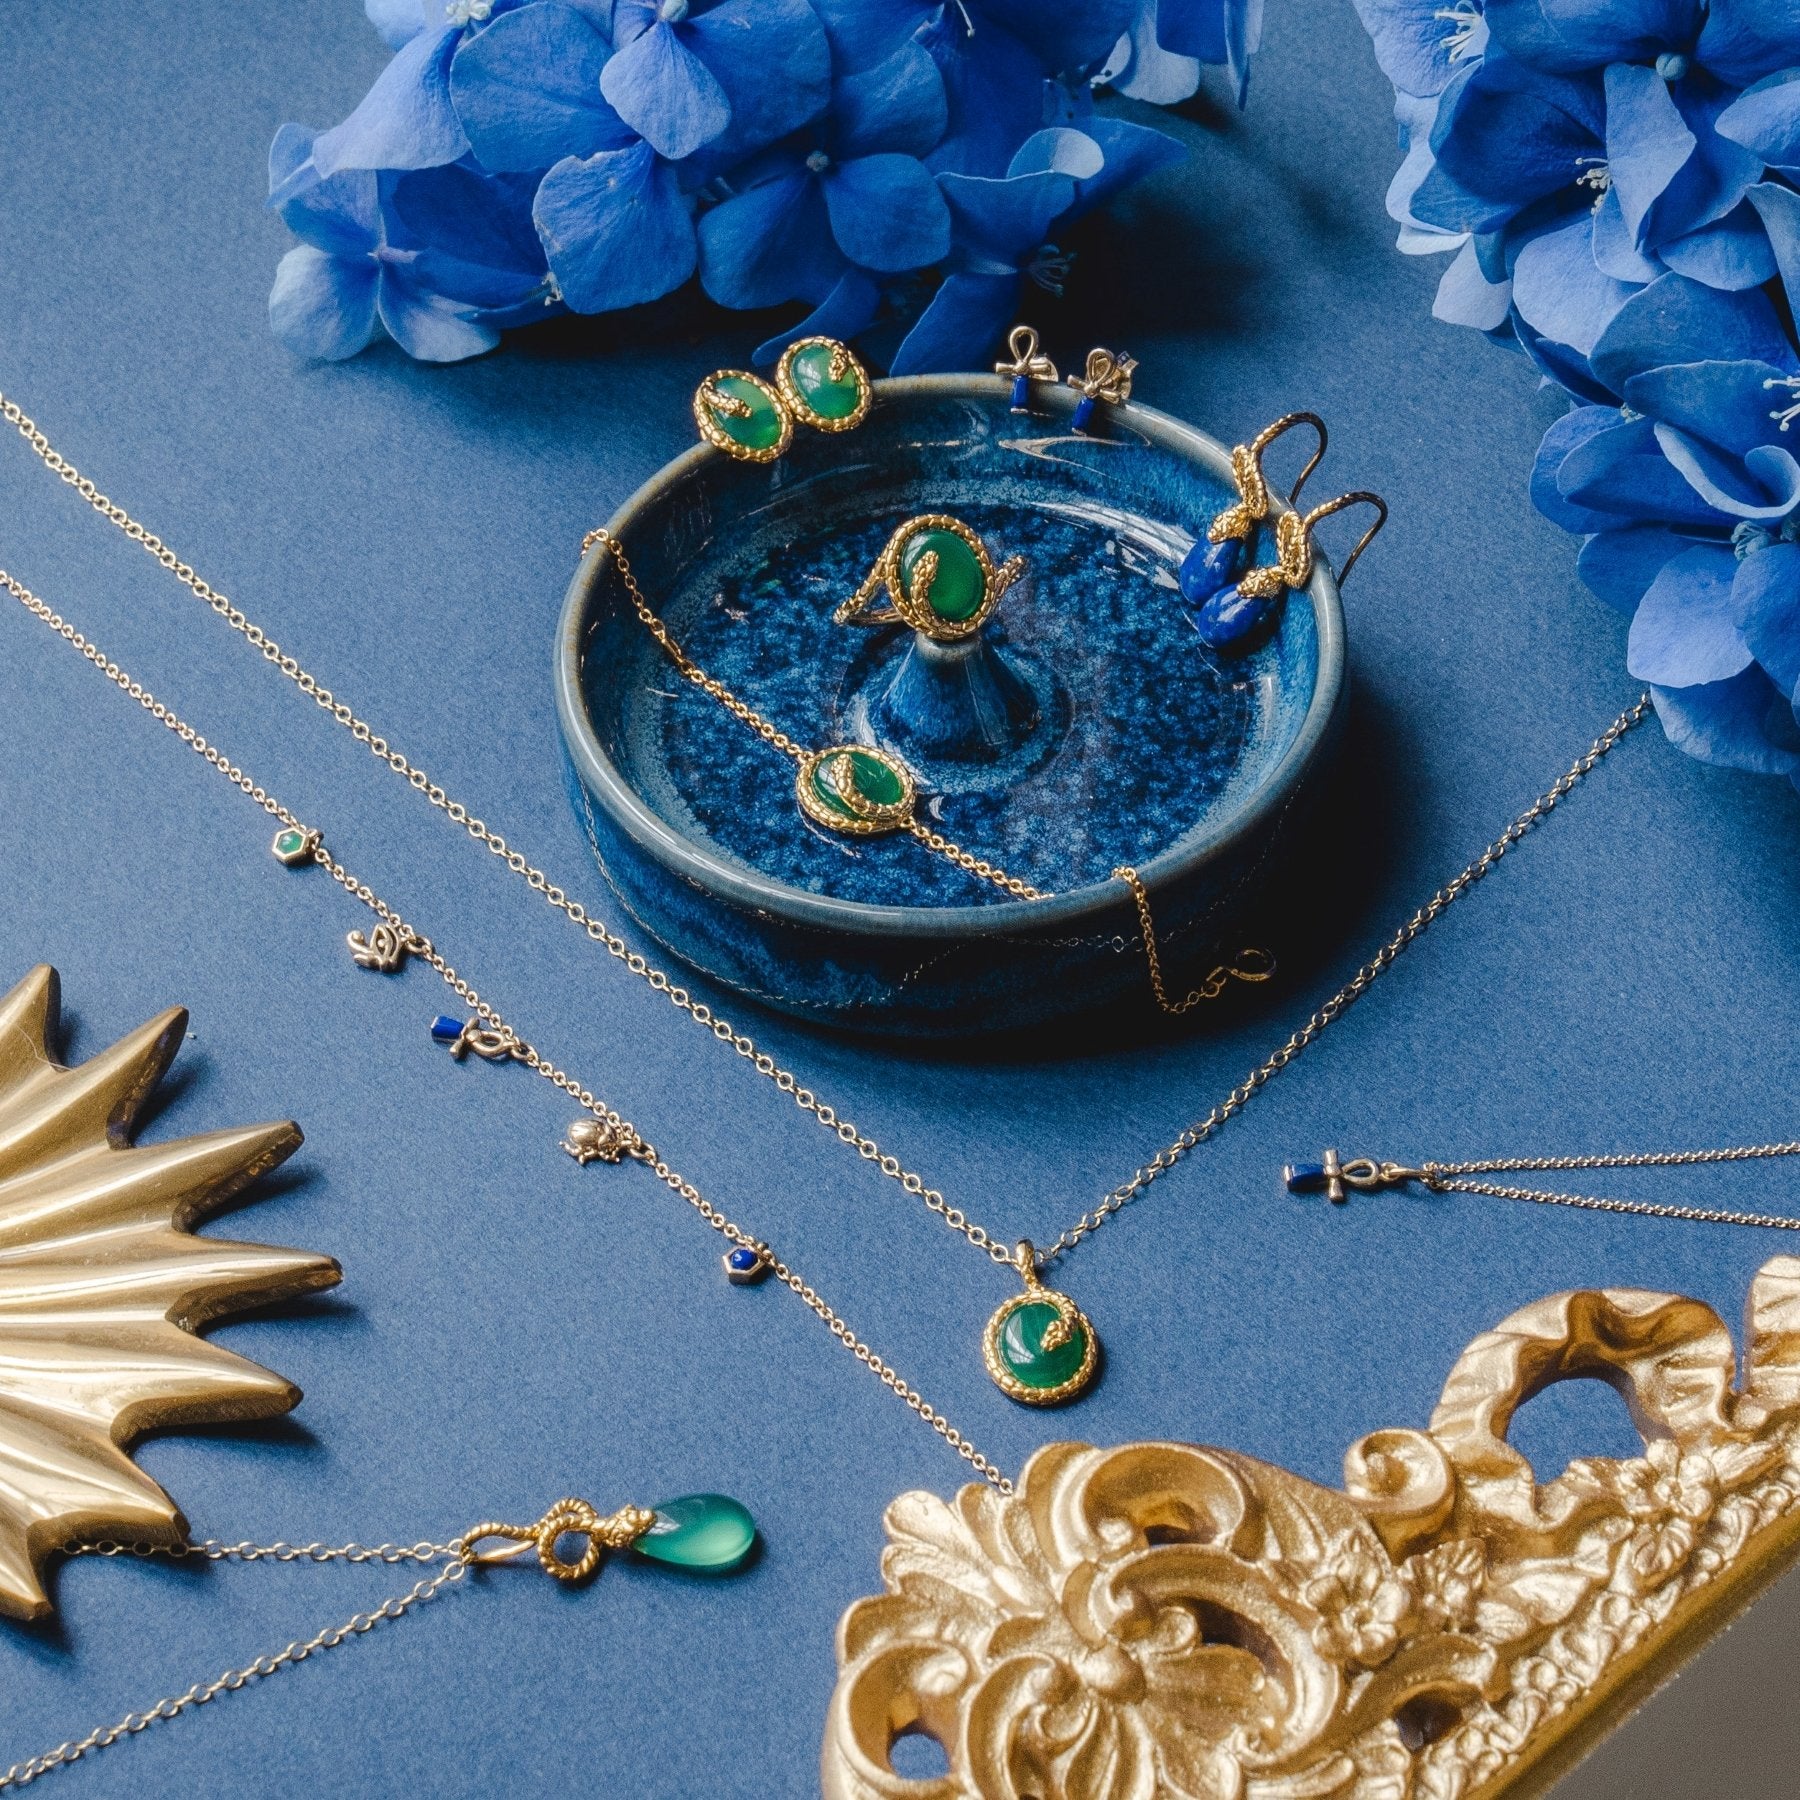 ECFEW™ Jewellery Collection inspired by Cleopatra